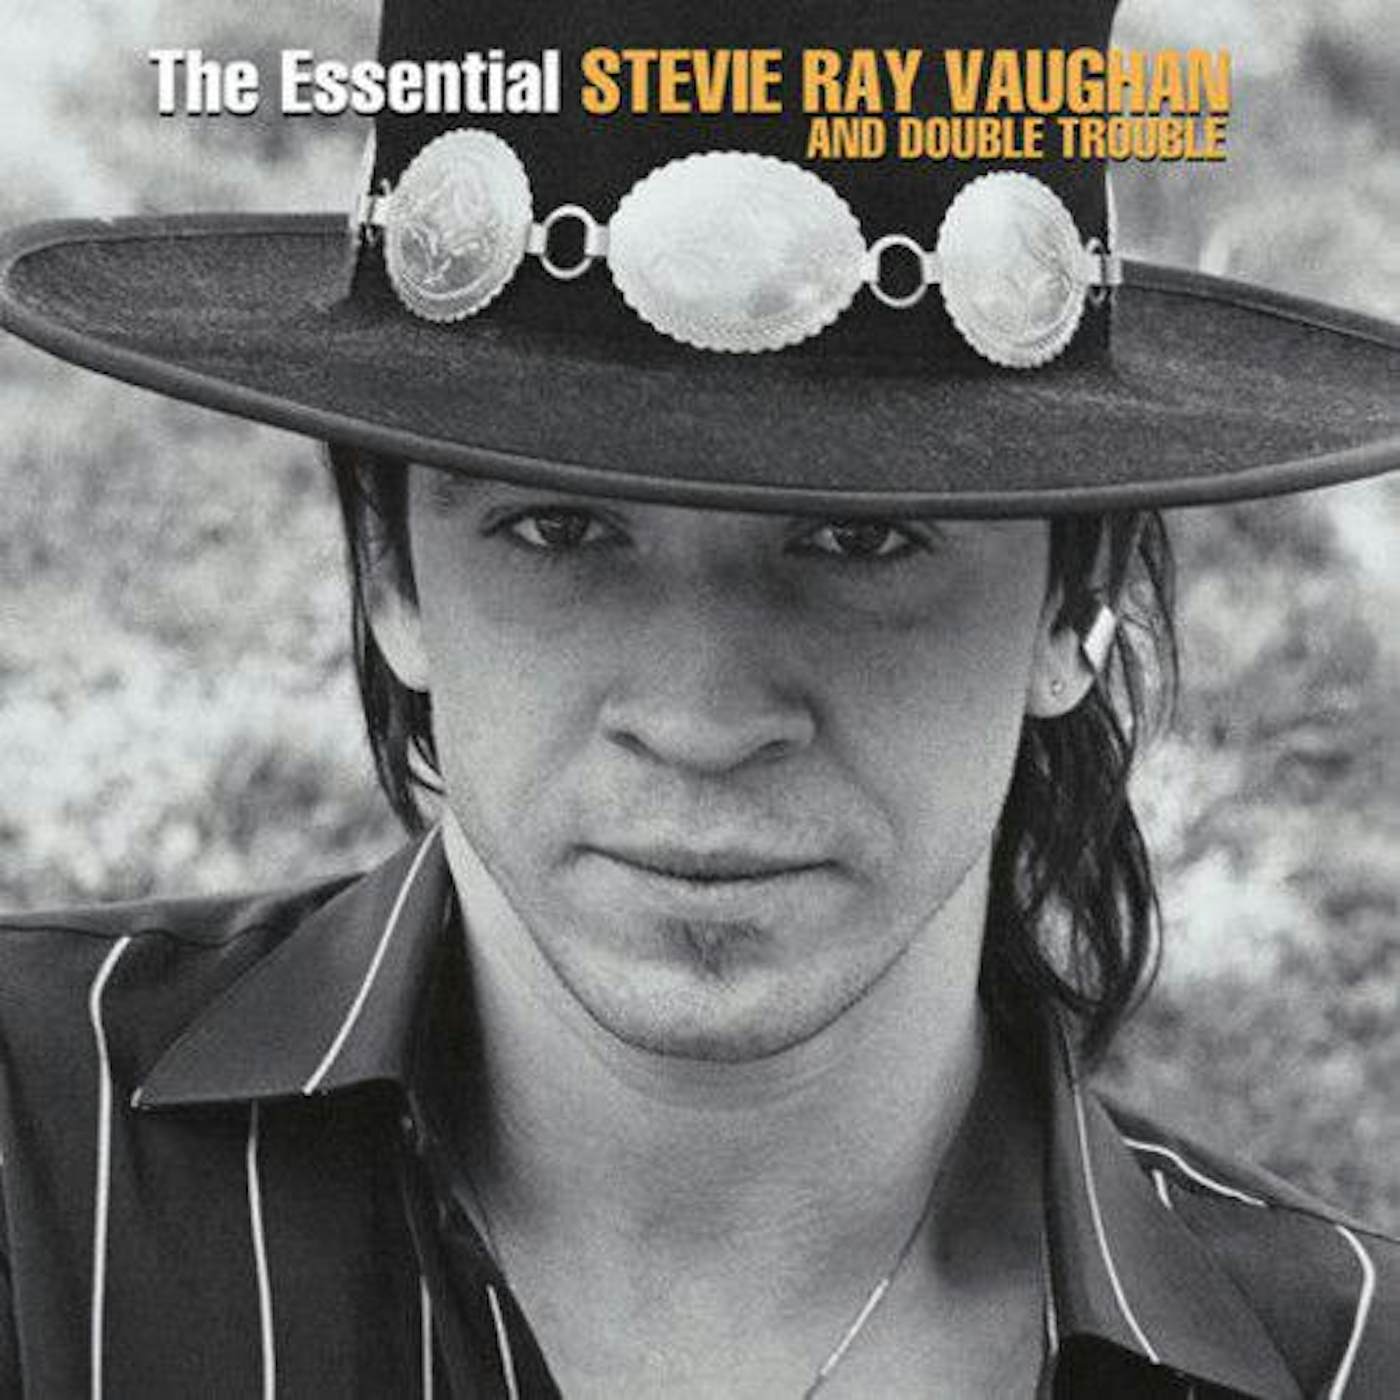 ESSENTIAL STEVIE RAY VAUGHAN & DOUBLE TROUBLE (2LP) Vinyl Record